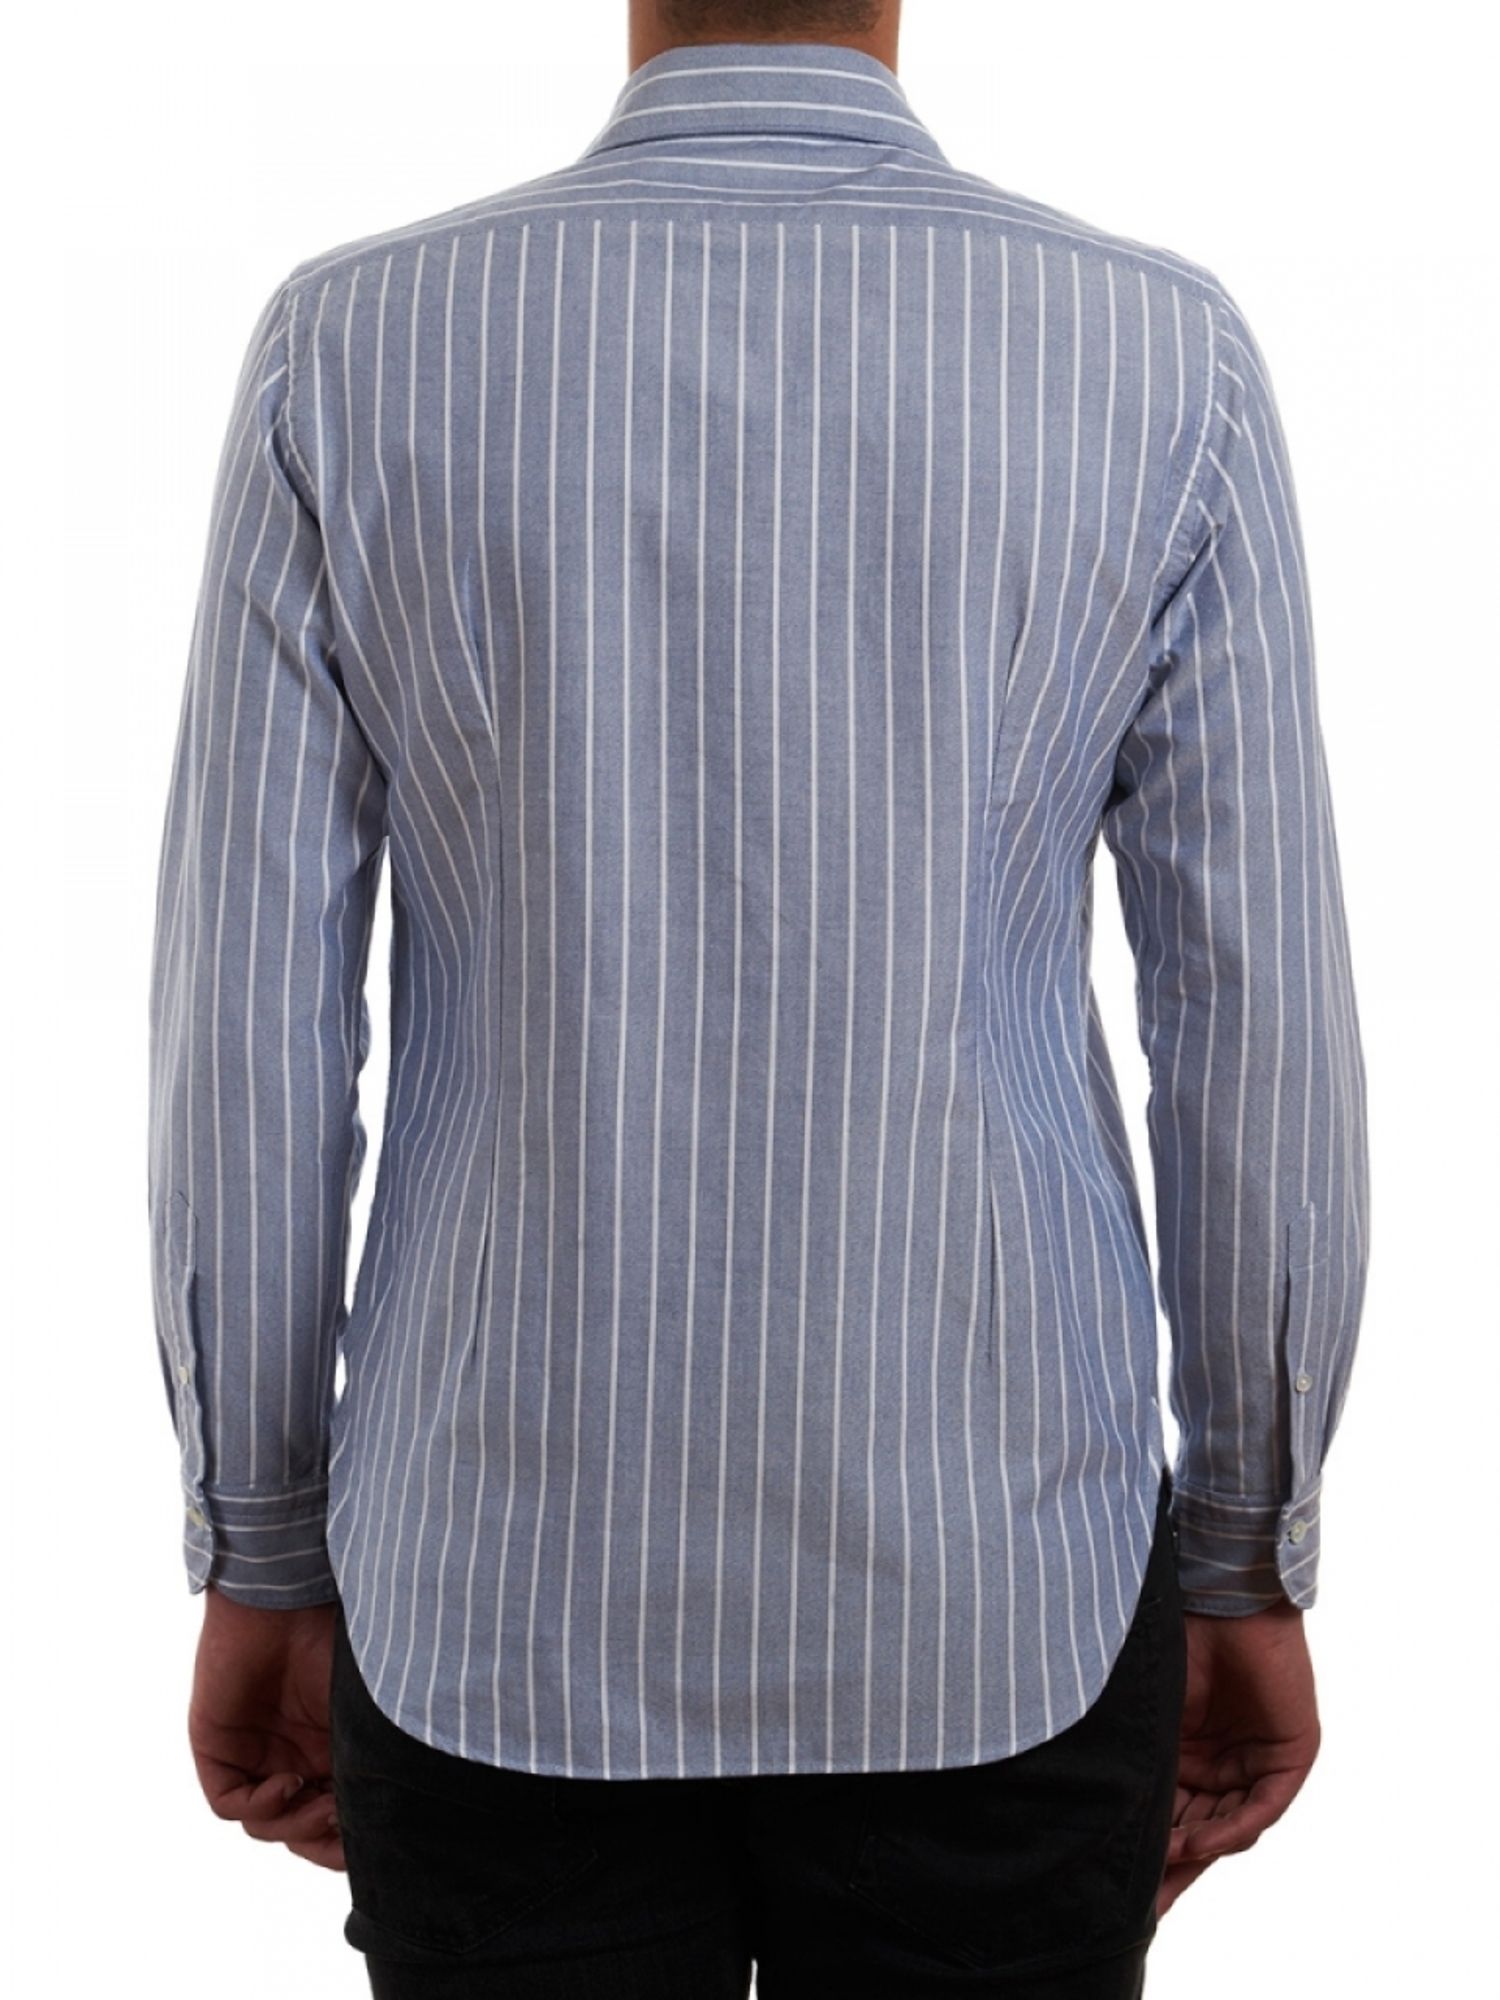 Washed oxford light-blue shirt striped white - The Sartorialist